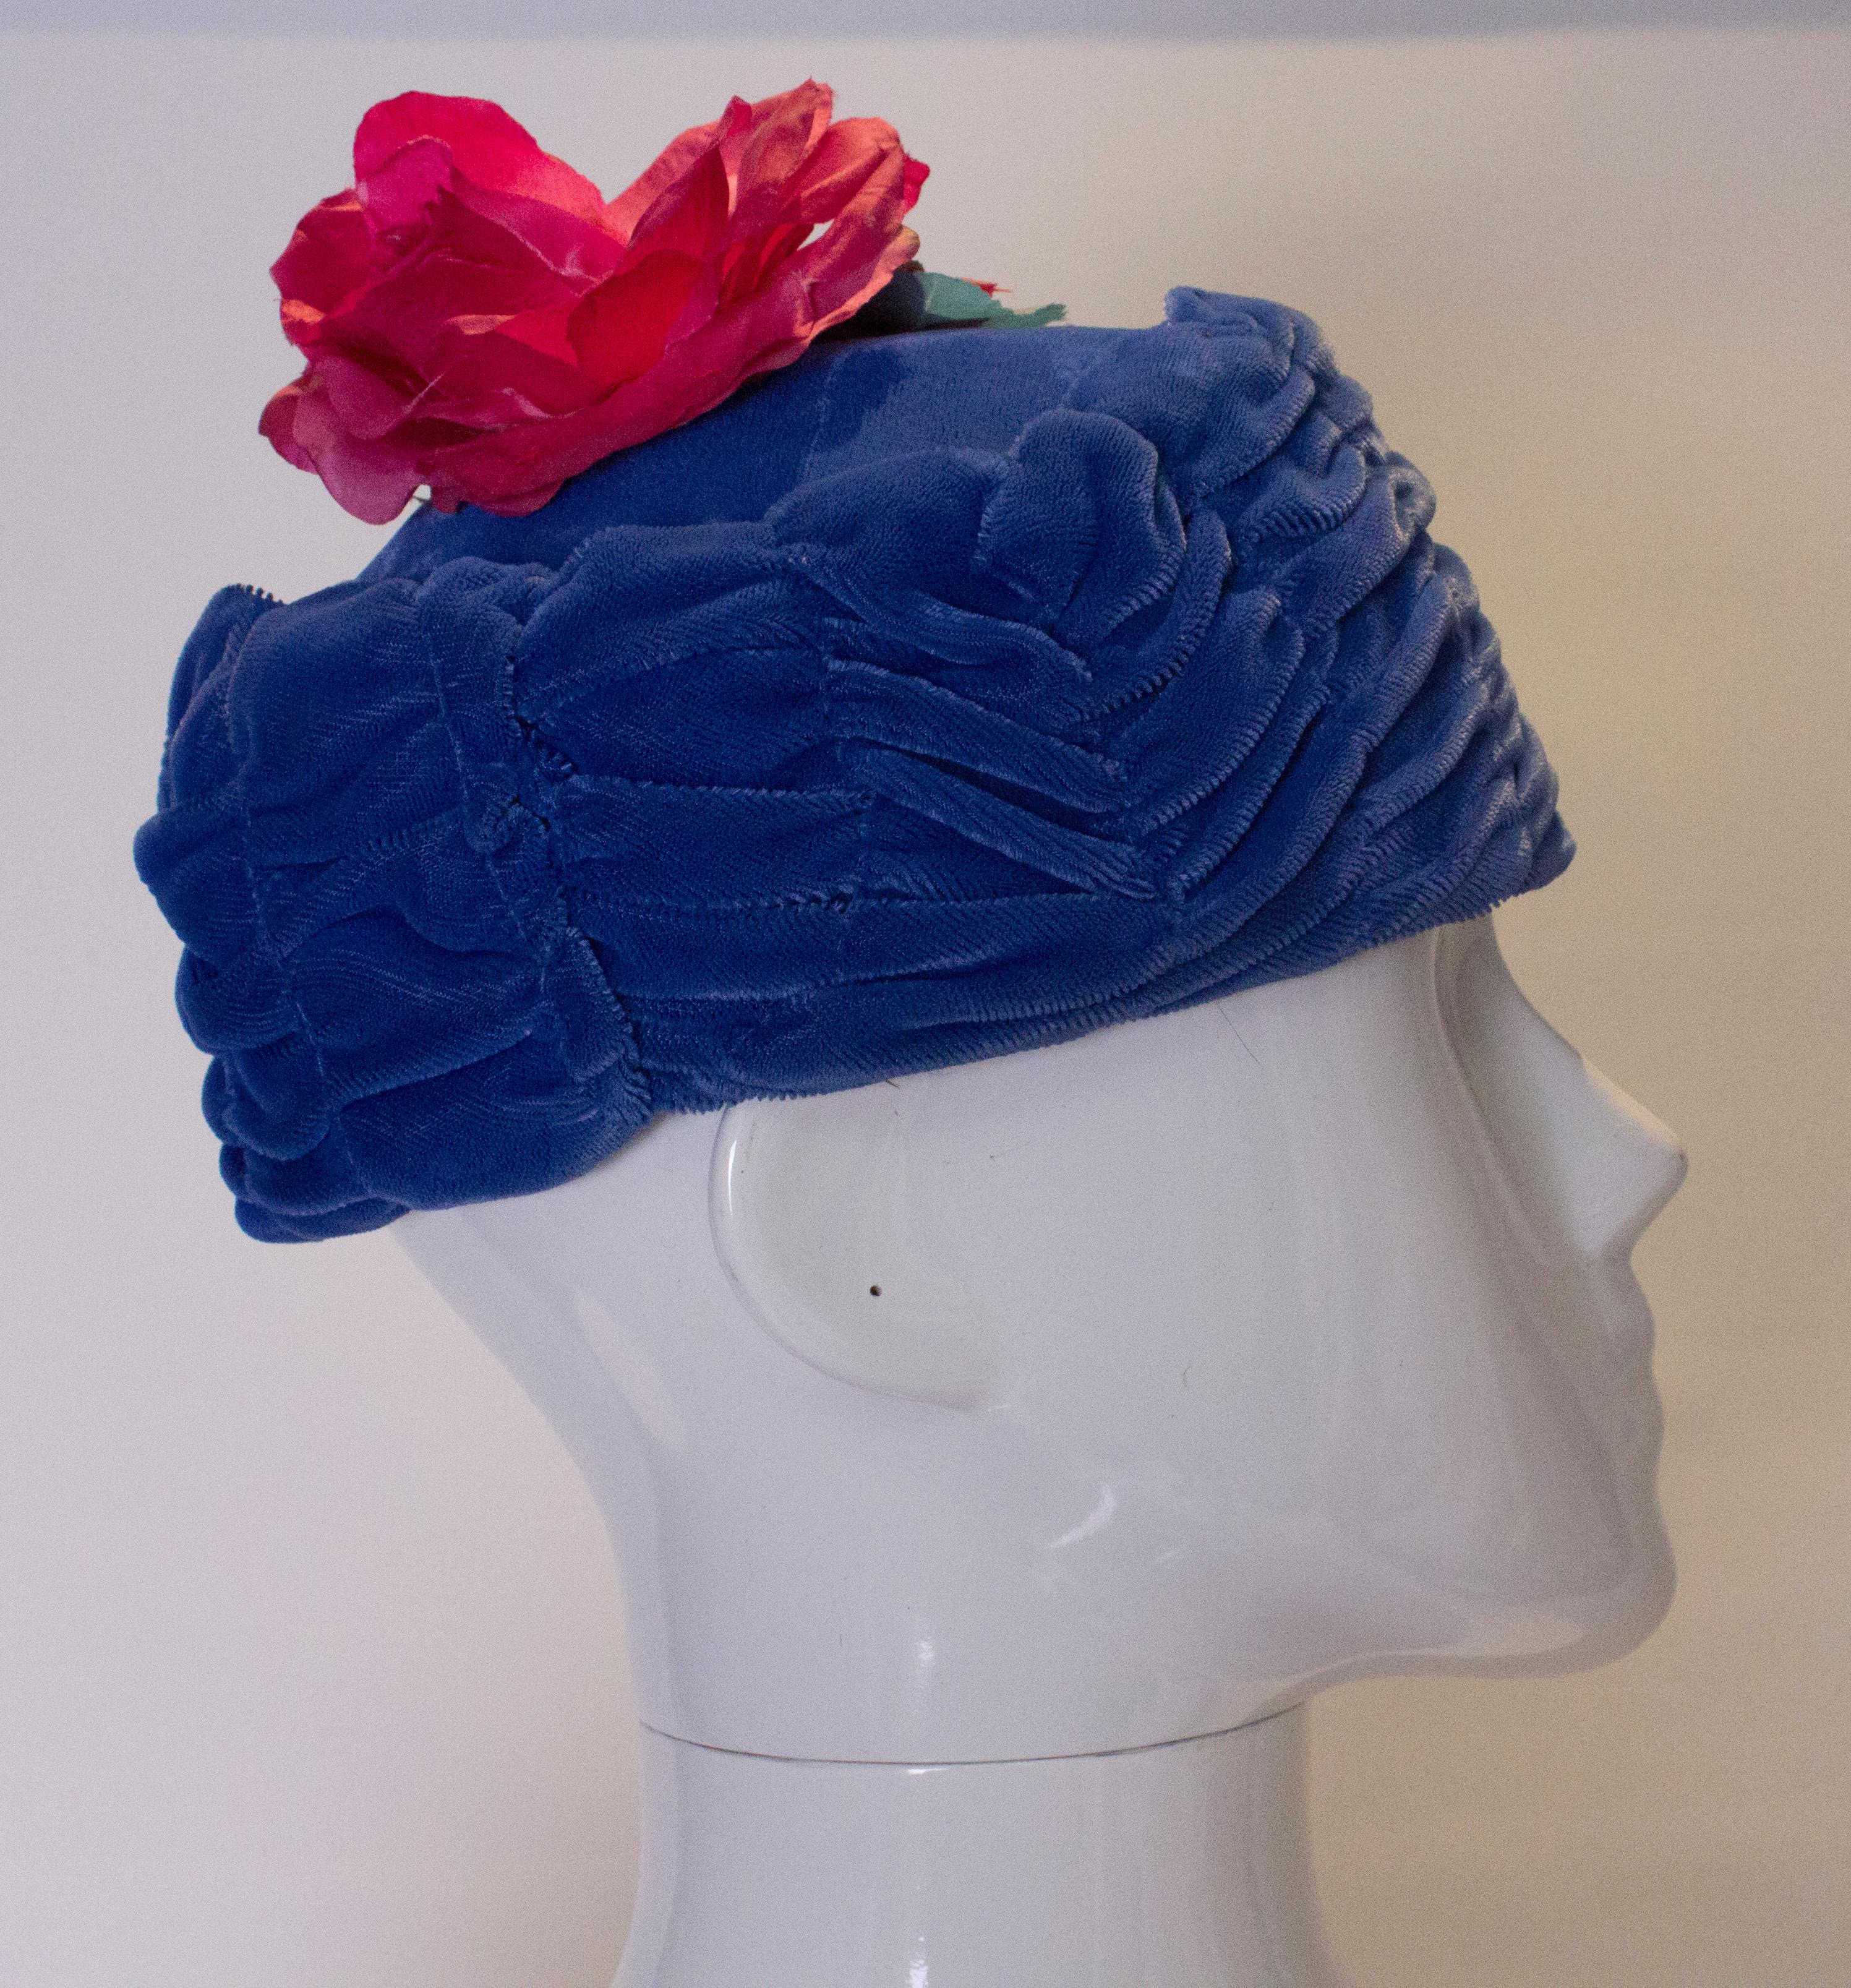 A chic blue velvet vintage hat , with a decorative pink flower on top. The hat is lined in net, and the inner circumference measures 22''.